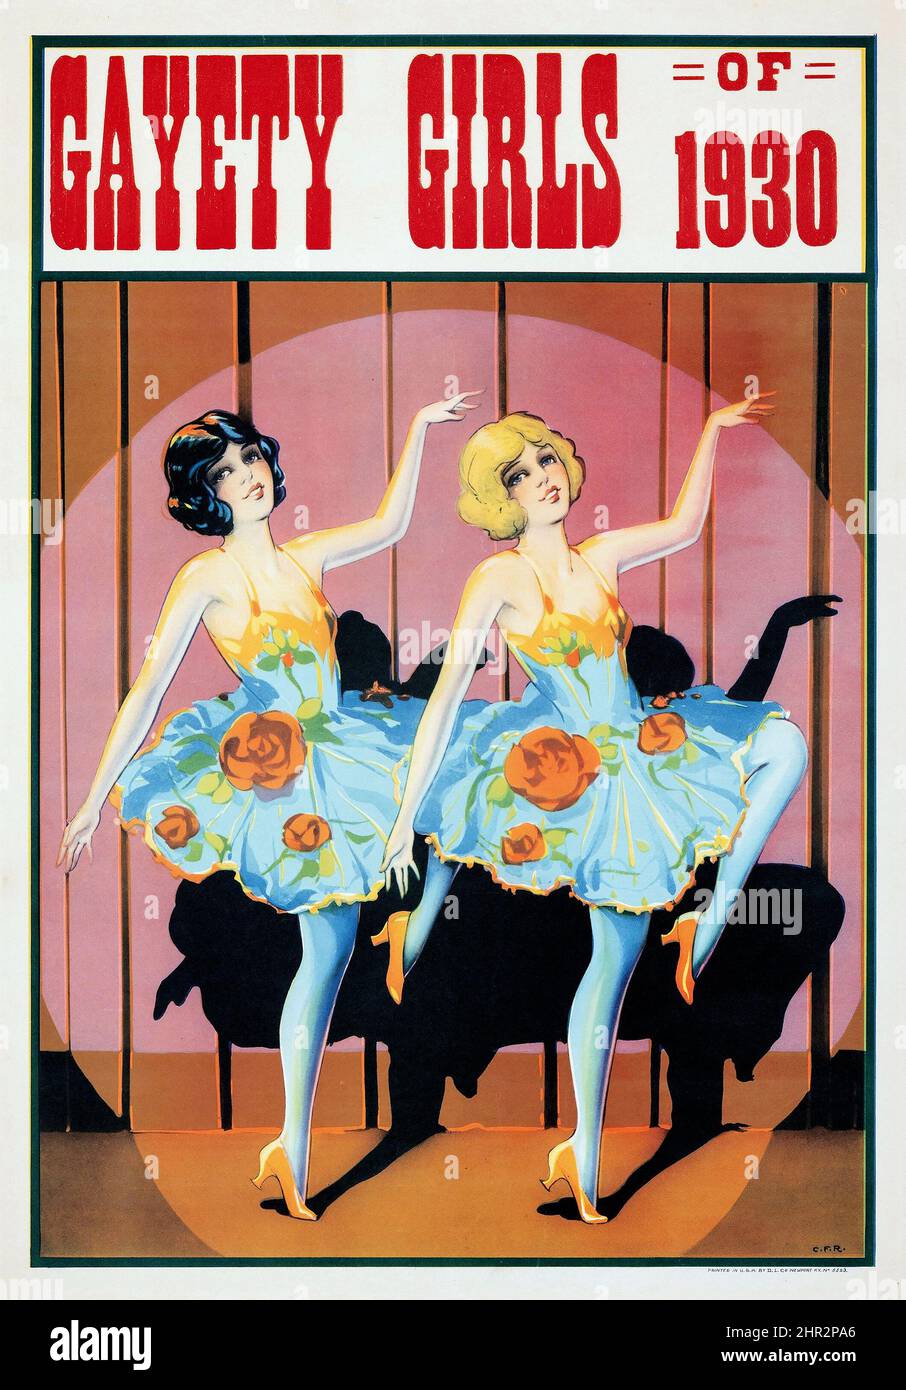 Gayety Girls of 1930. Theater Poster - vintage advertisement poster Stock Photo